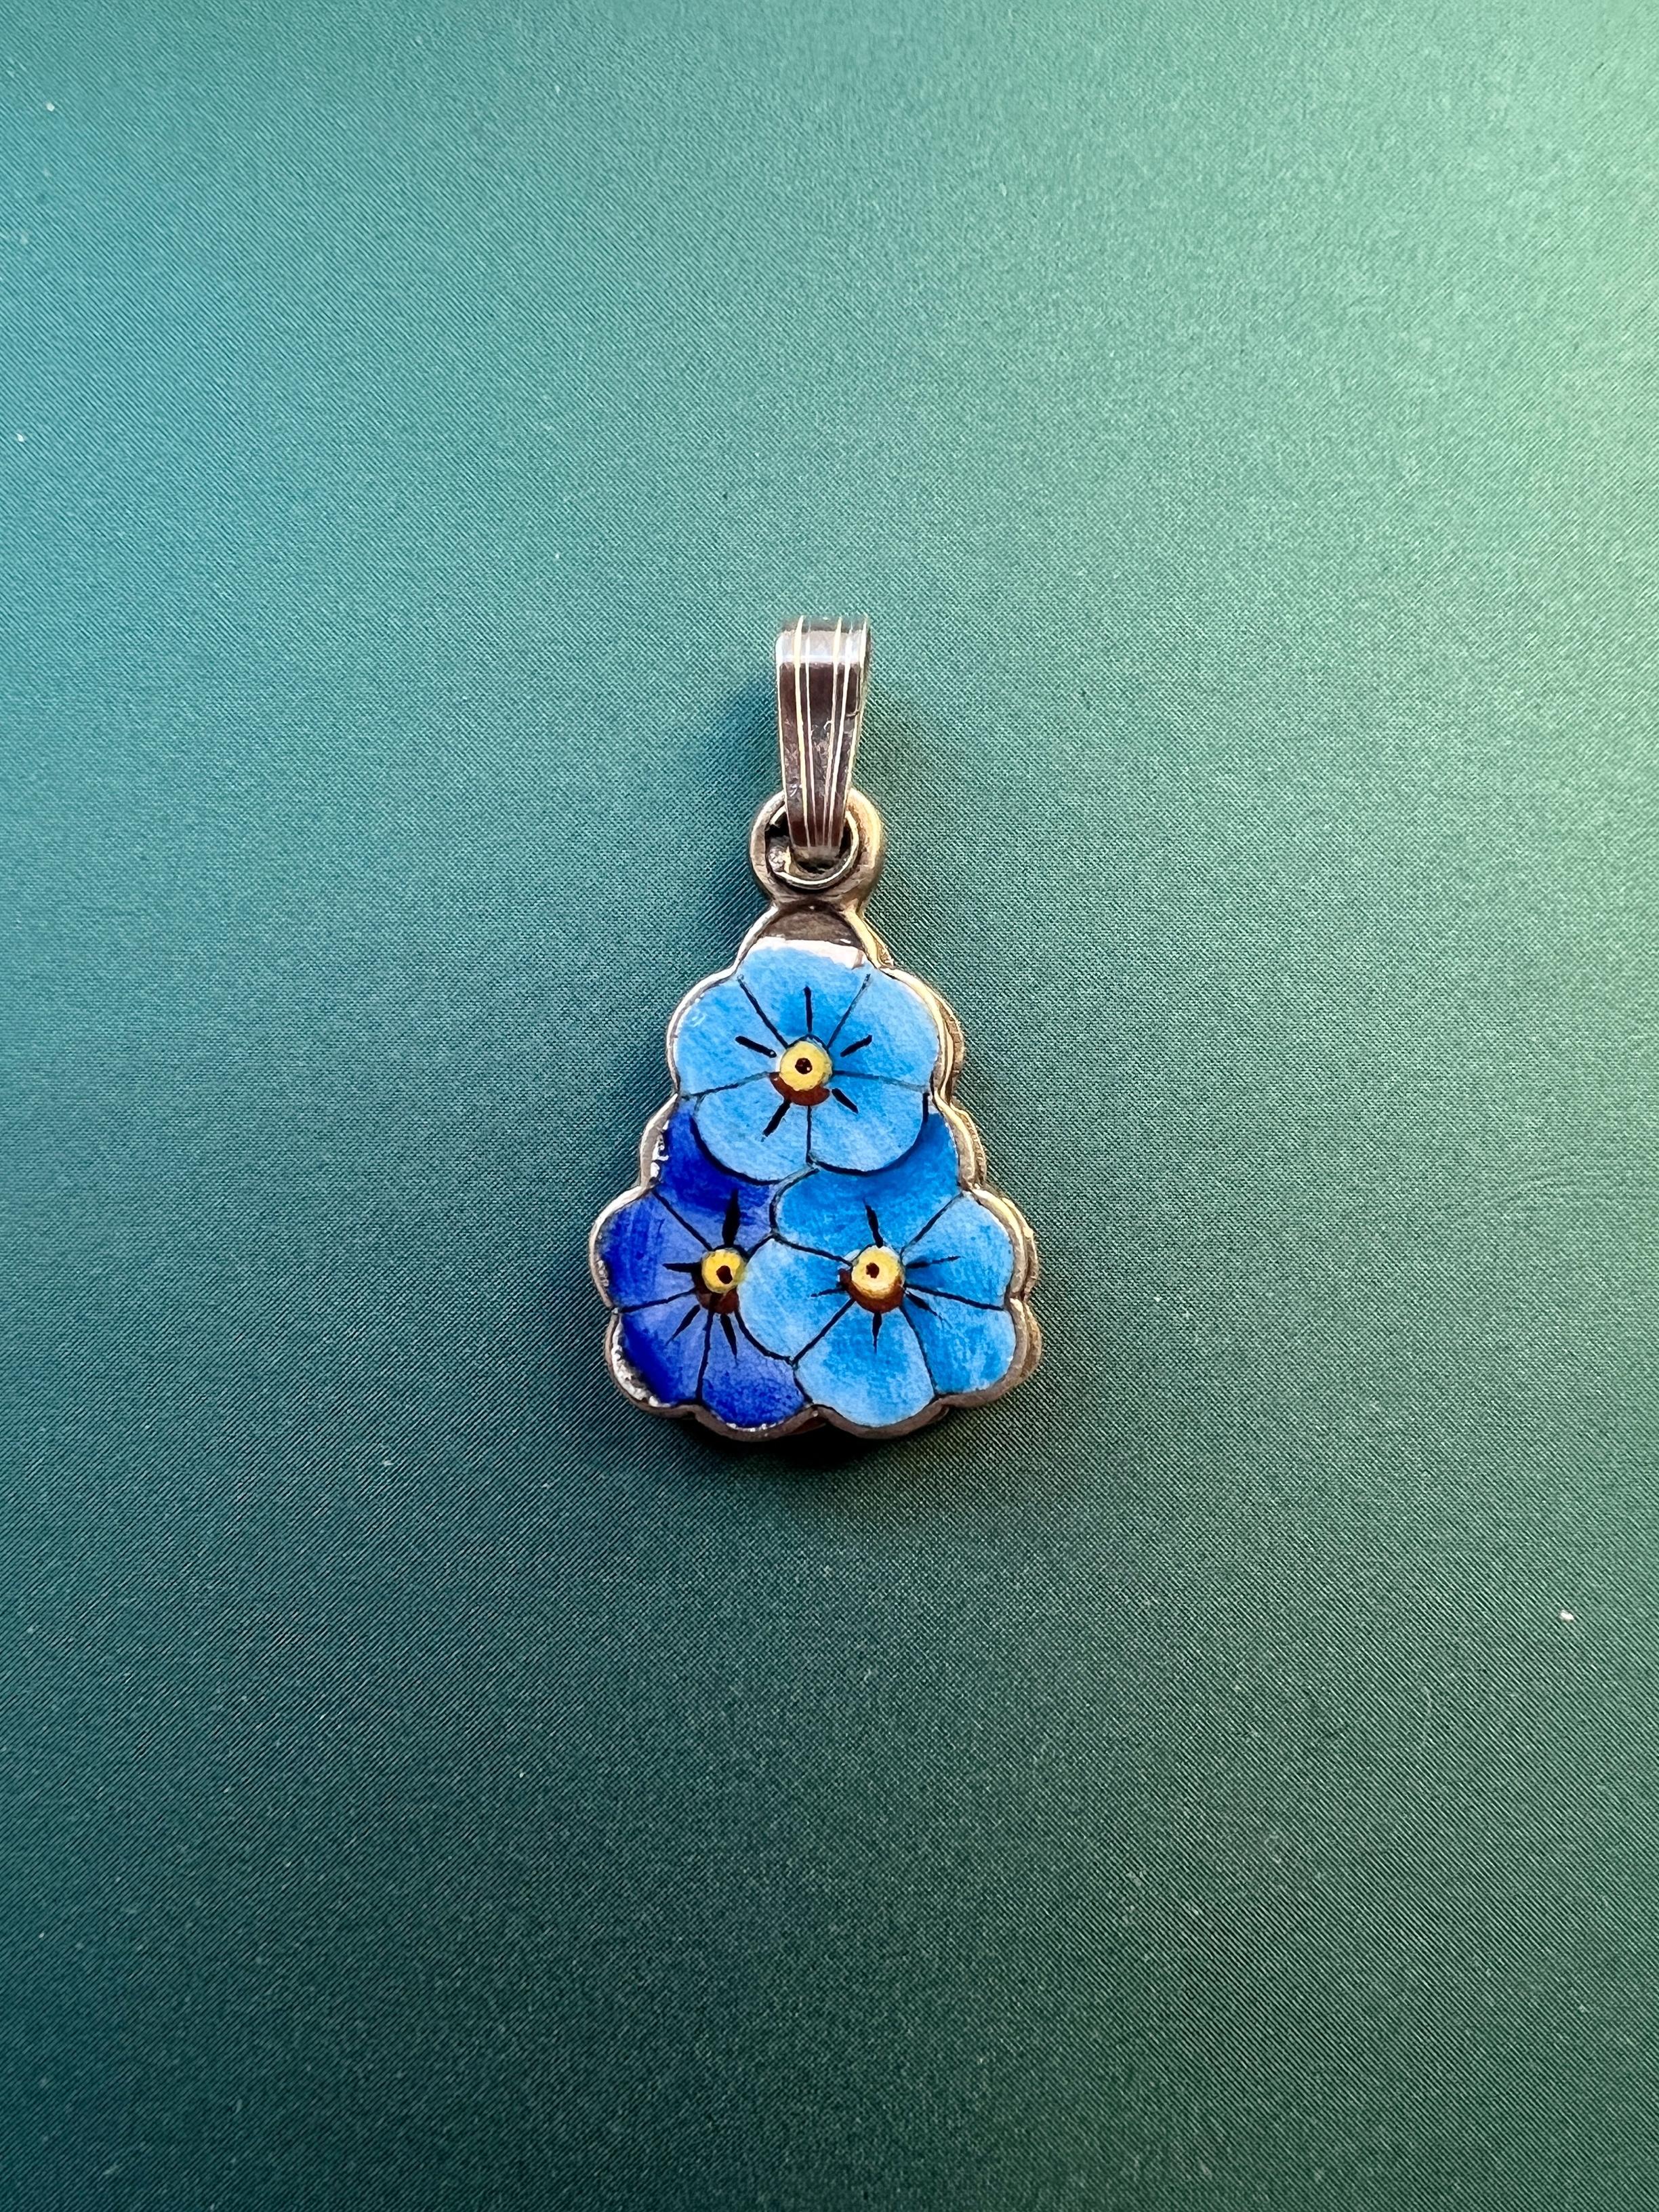 In front of us a very rare and lovely antique pendant: It features three blue enameled pensy flowers with yellow heart.  You can slide the pendant to discover what’s hided inside of the pendant, it is written “ ne m’oubliez pas”, which means “ do